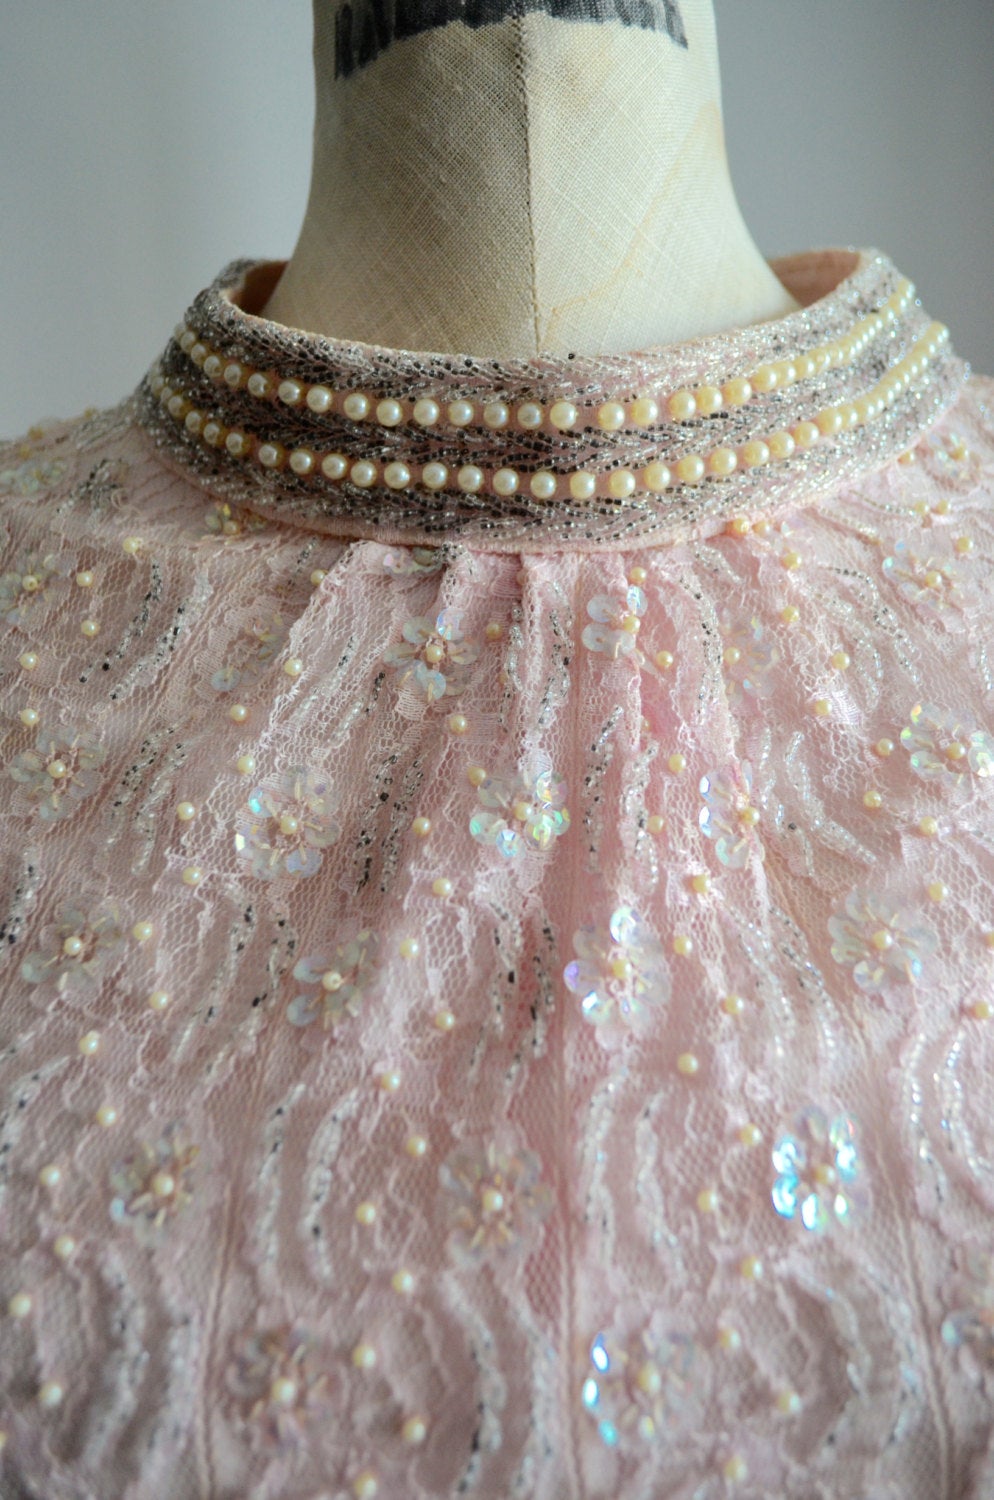 Dress Pearl Blush Pink White And Pearl Beaded Sequin Cocktail Dress Sequined Beaded Couture Gown